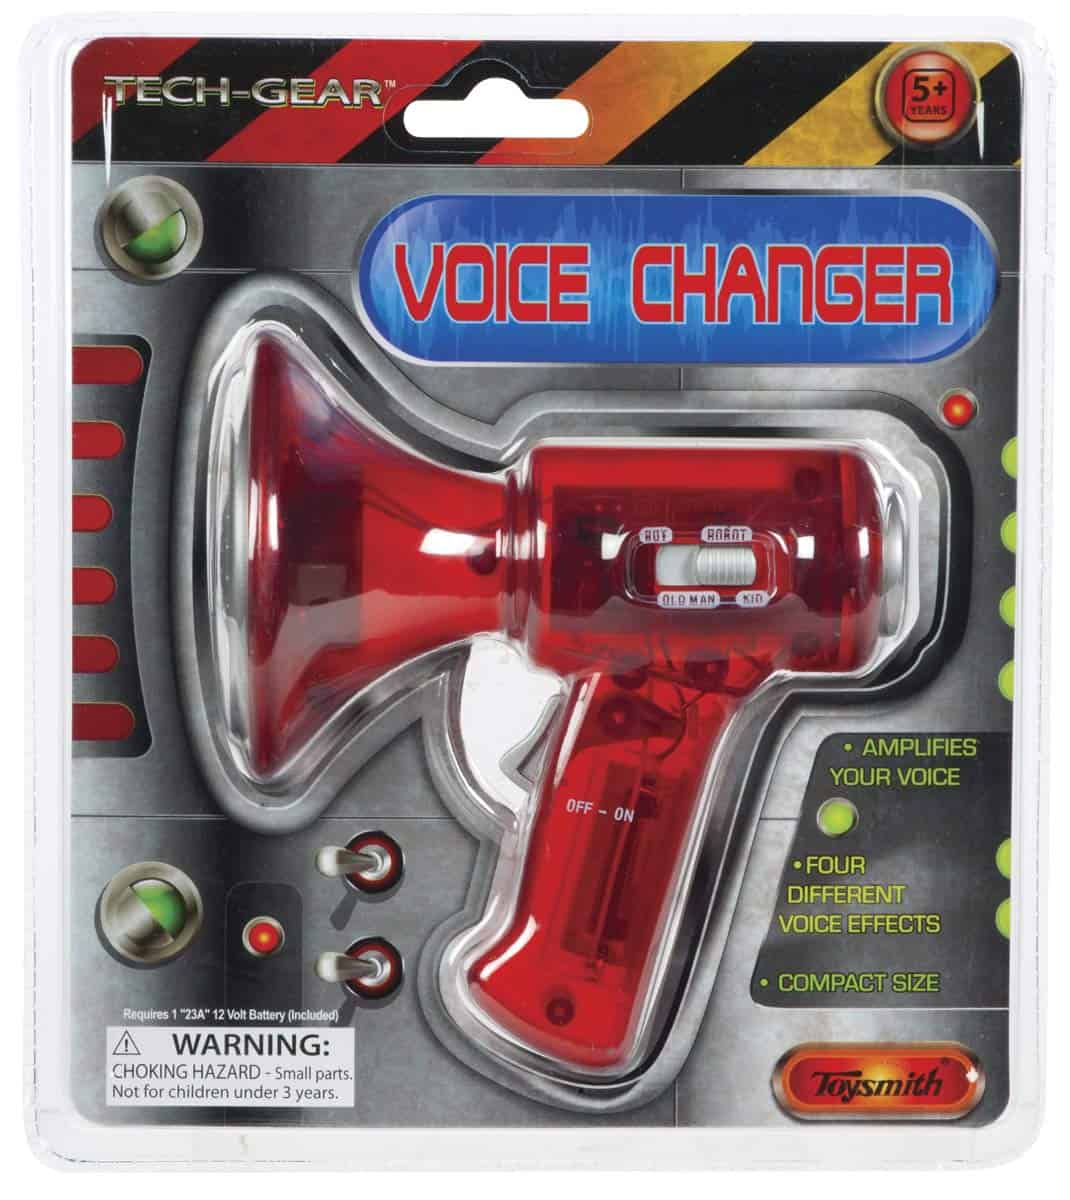 simple easy voice changer small